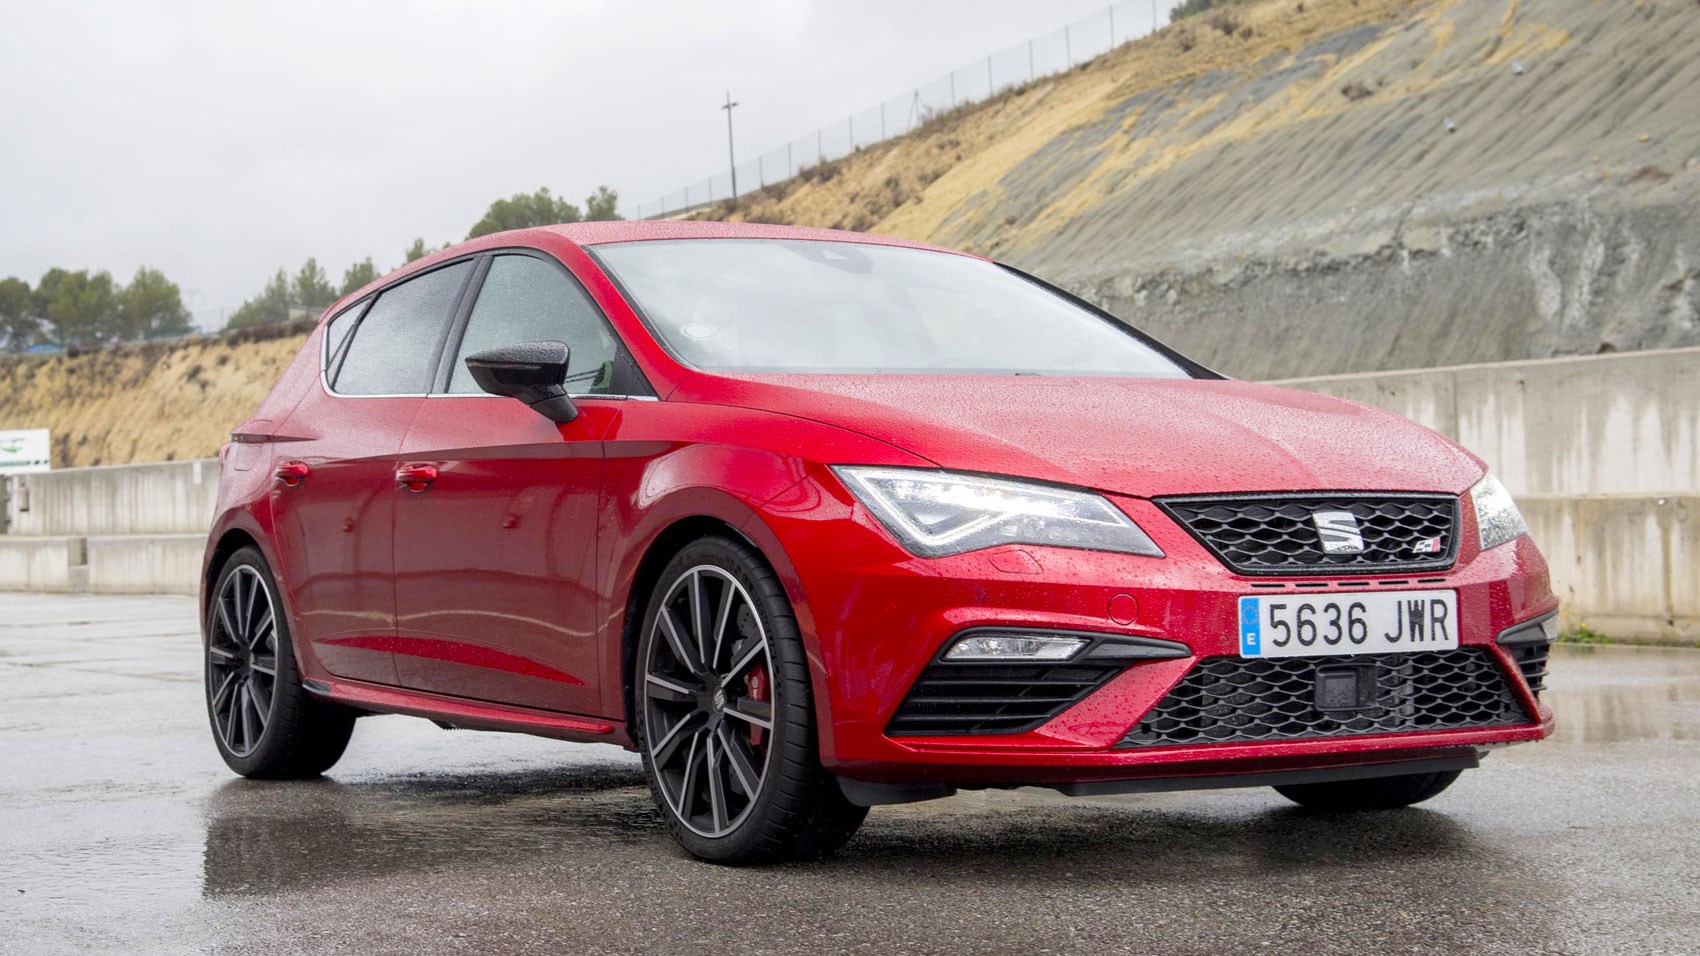 The new Seat Leon Cupra 300: a Golf R on the not-so-cheap?